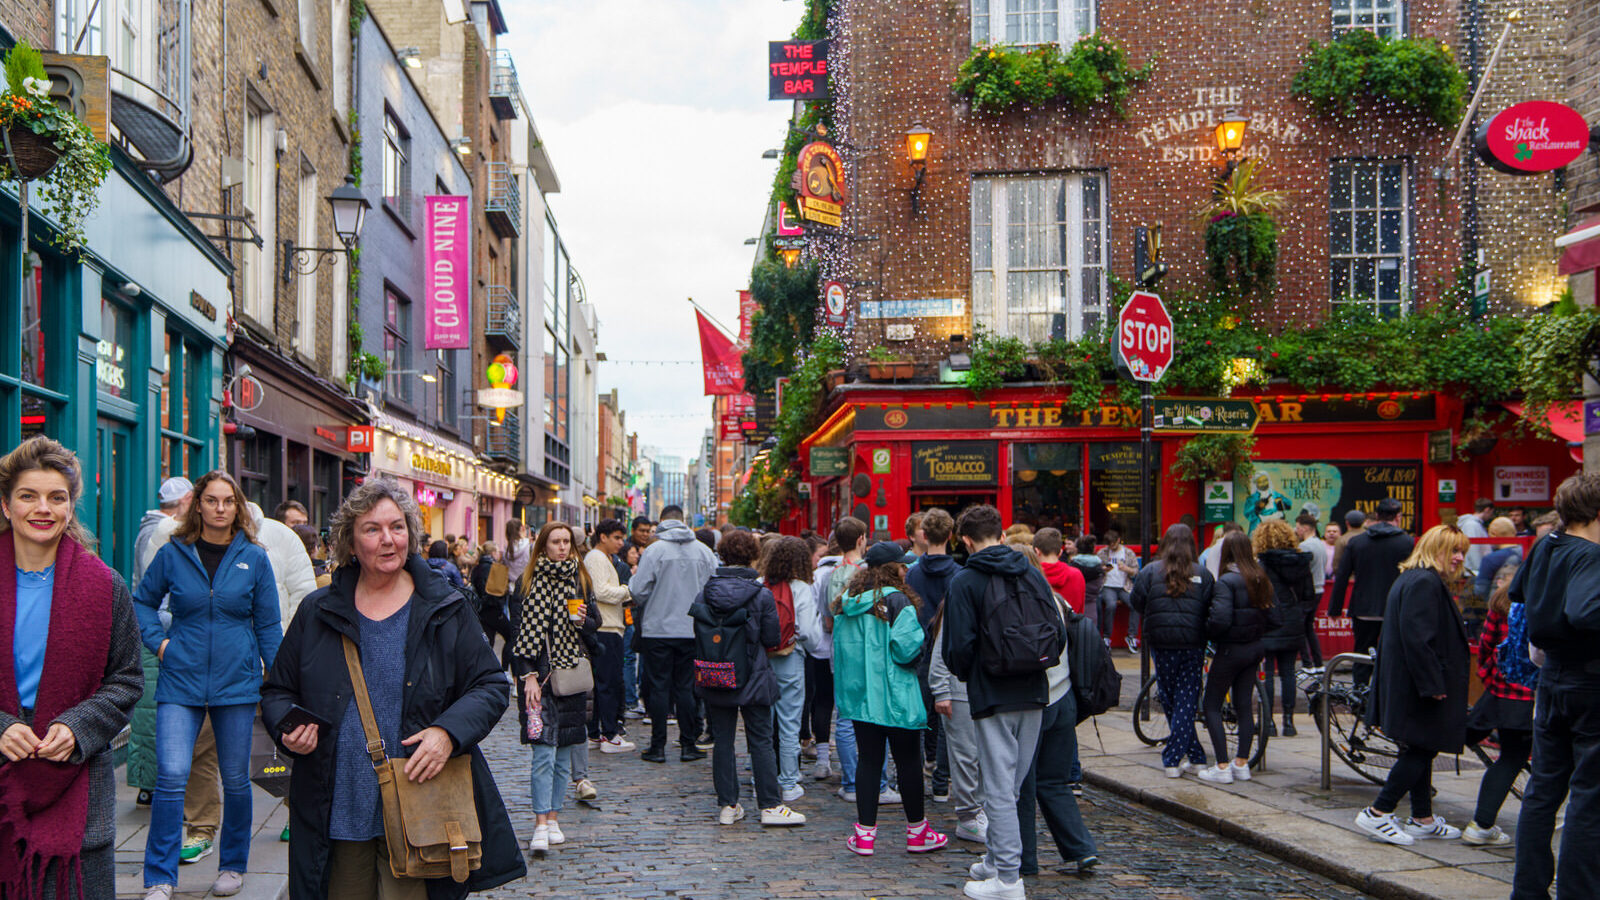 THE TEMPLE BAR PUB [IS IN TEMPLE BAR AND IT IS NOT THE OLDEST PUB IN THE IMMEDIATE AREA]-228208-1